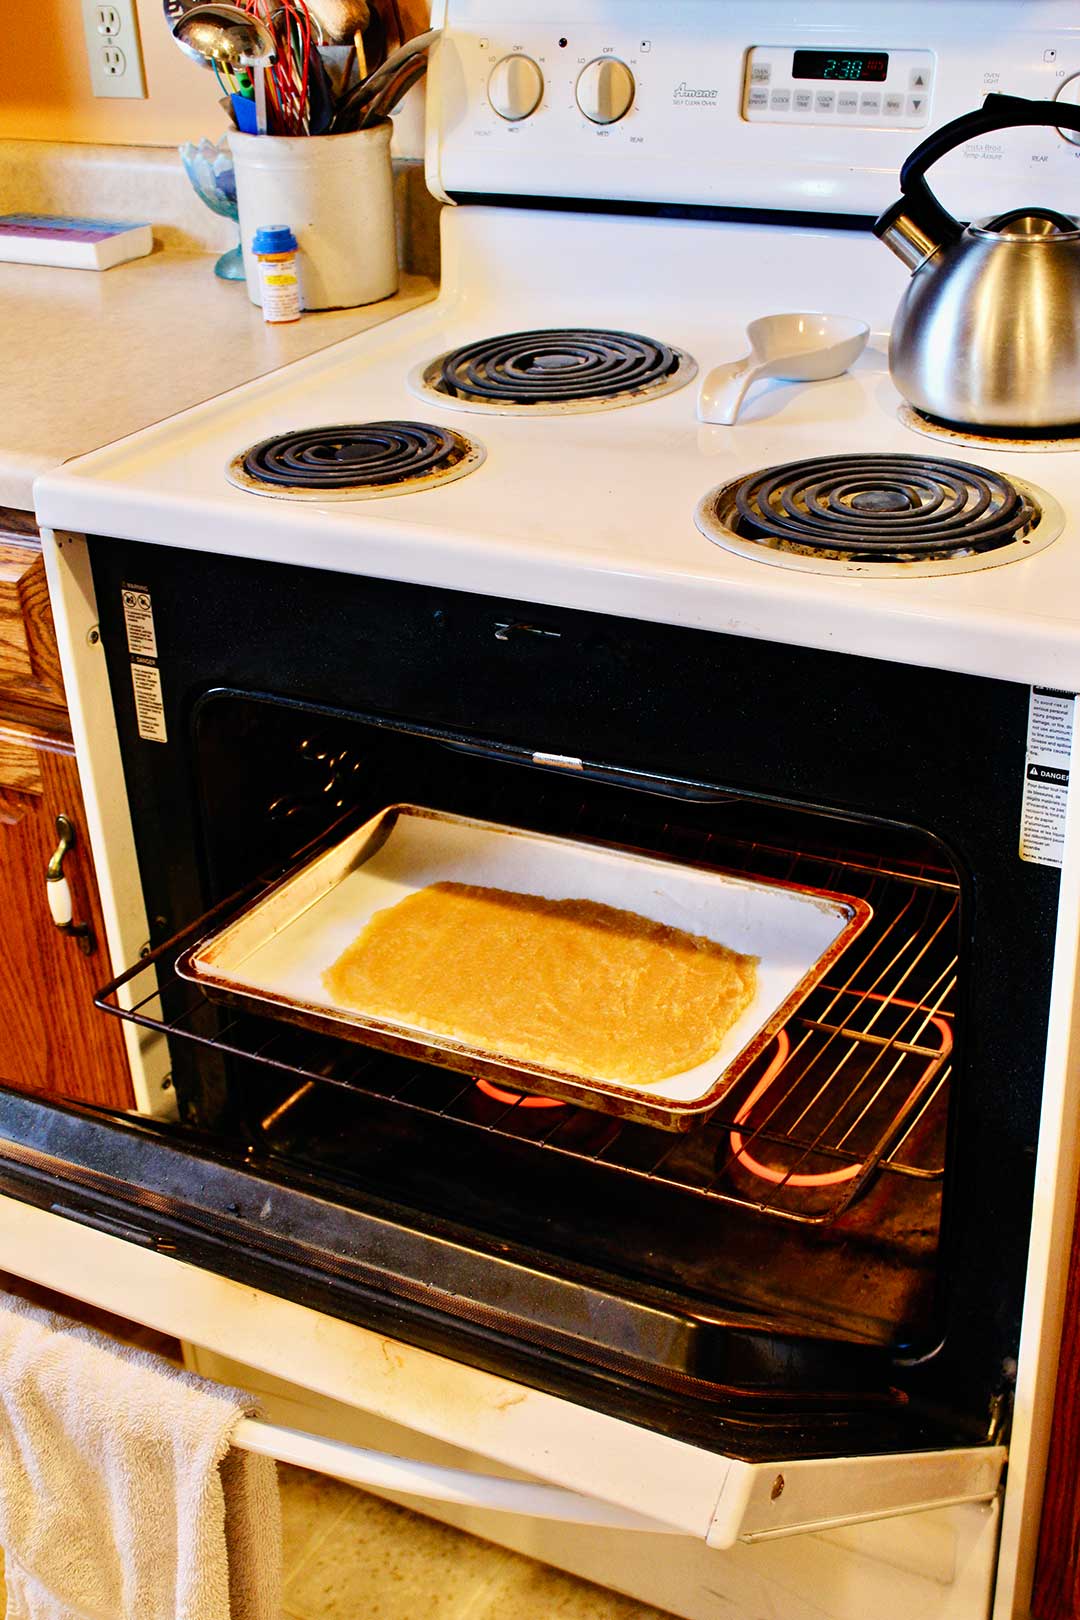 Image of the inside of an oven with a cookie sheet of pureed fruit ready to be baked.